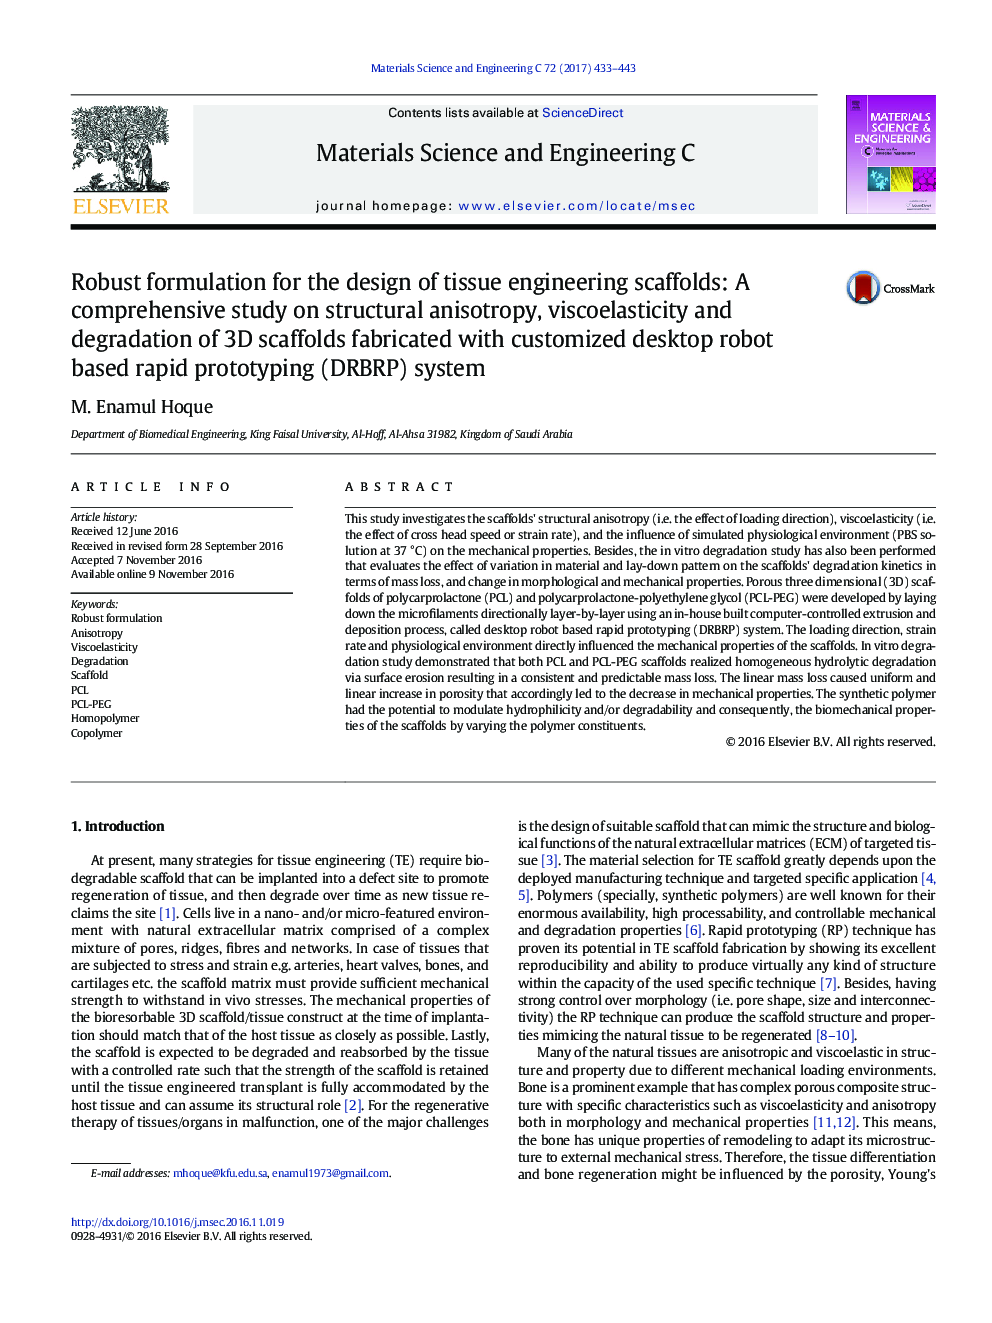 Robust formulation for the design of tissue engineering scaffolds: A comprehensive study on structural anisotropy, viscoelasticity and degradation of 3D scaffolds fabricated with customized desktop robot based rapid prototyping (DRBRP) system